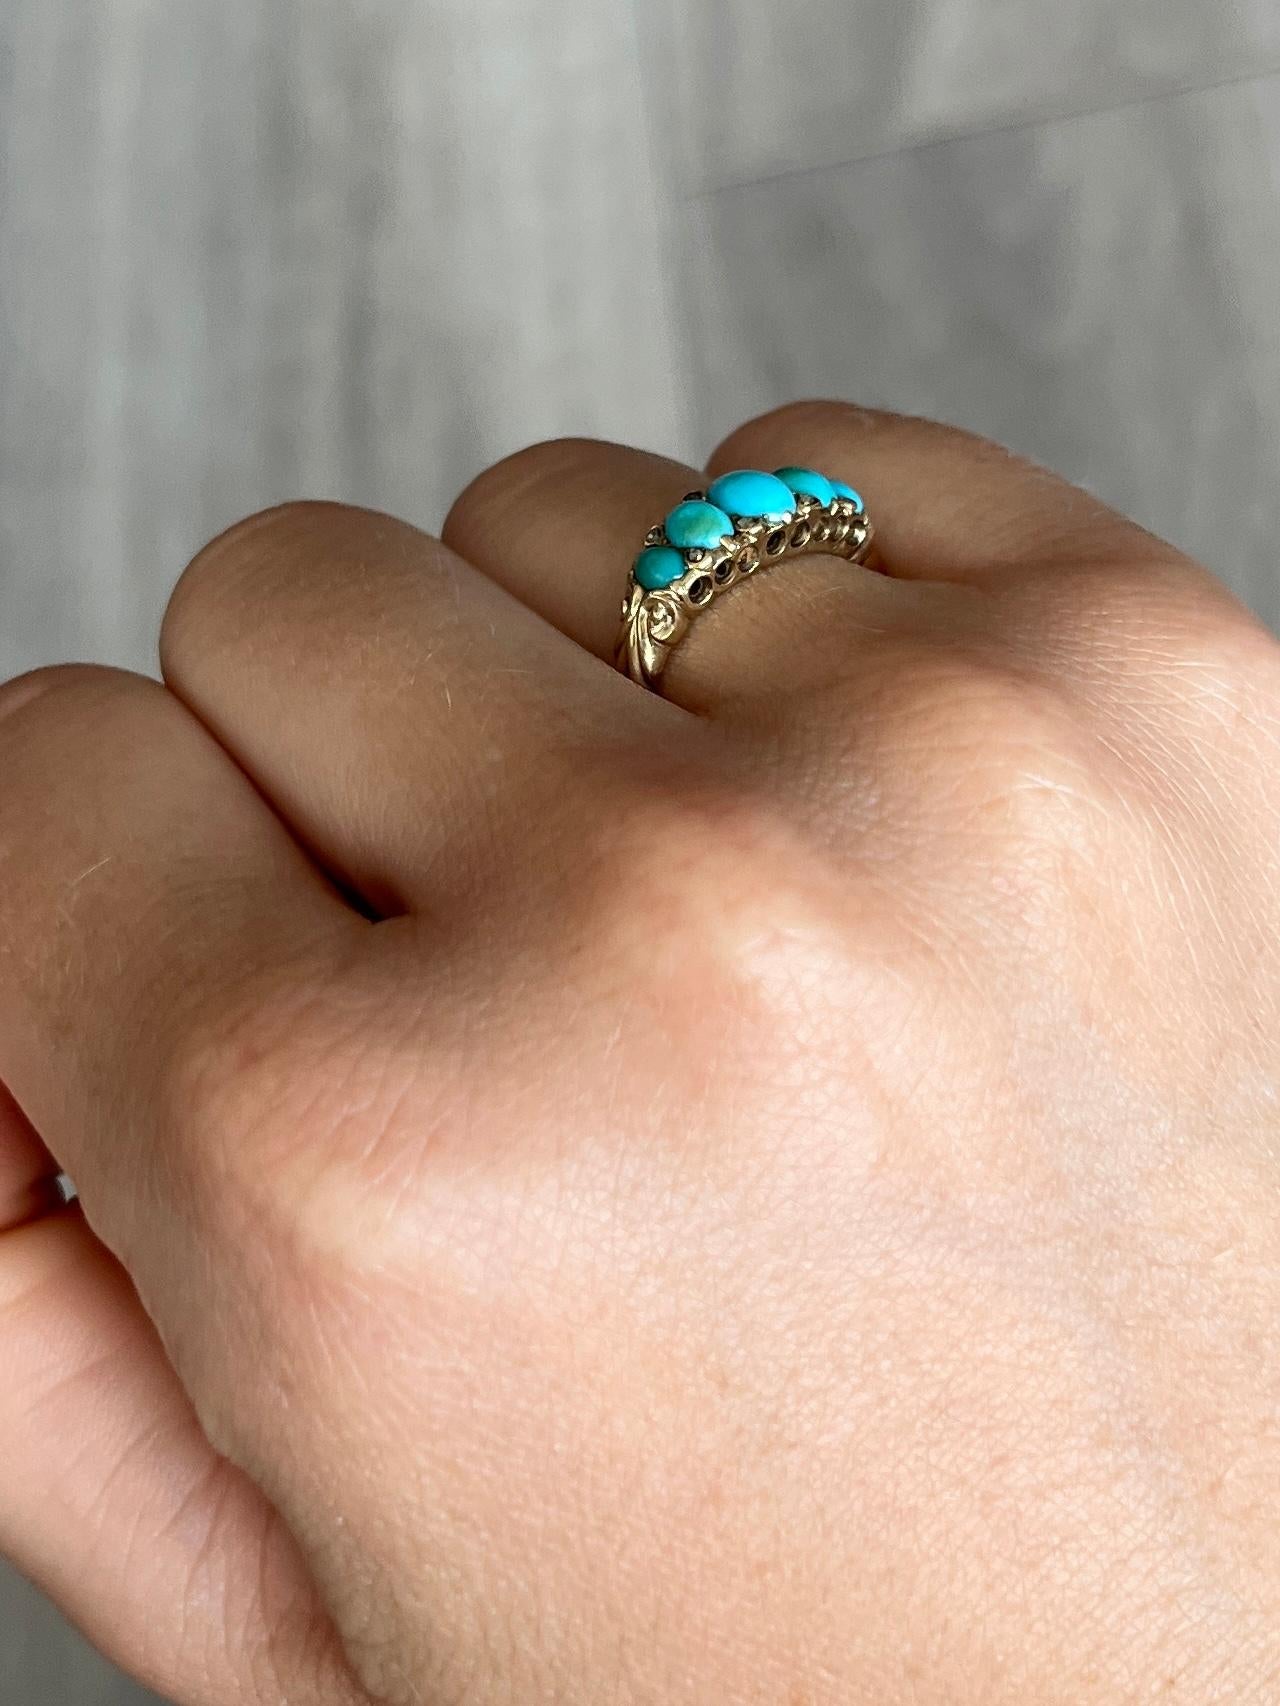 This wonderful turquoise five stone ring is modelled in 18ct gold and features eight small diamond points that sit between the oval turquoise stone cabochons. 

Ring Size: J 1/2 or 5

Weight: 6.5g